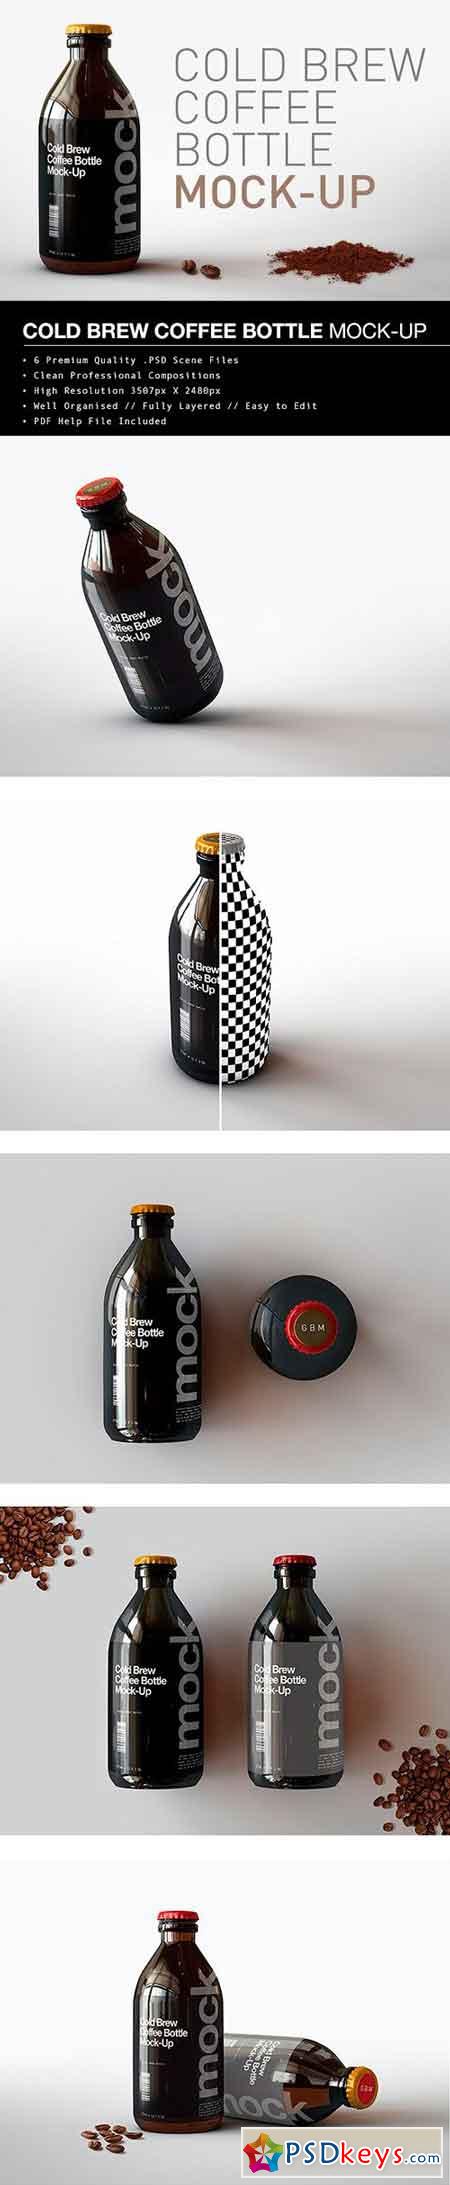 Download Cold Brew Coffee Bottle Mock-Up 1695956 » Free Download ...